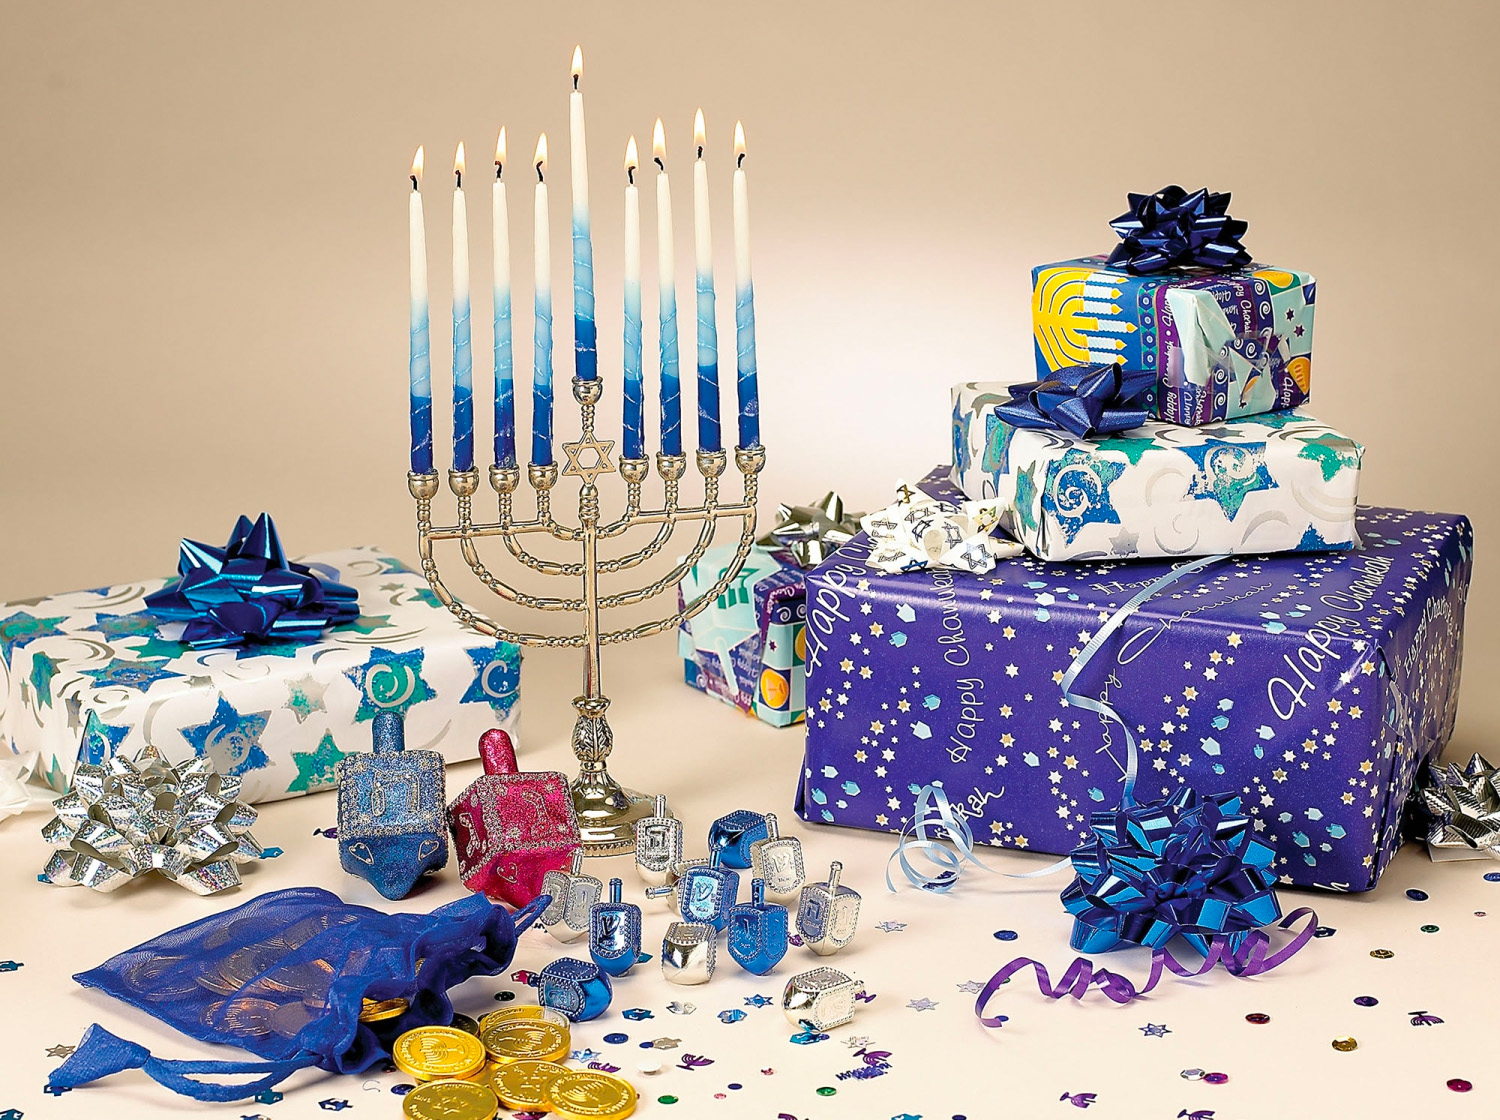 30 Best Hanukkah Gifts For Family and Friends in 2023